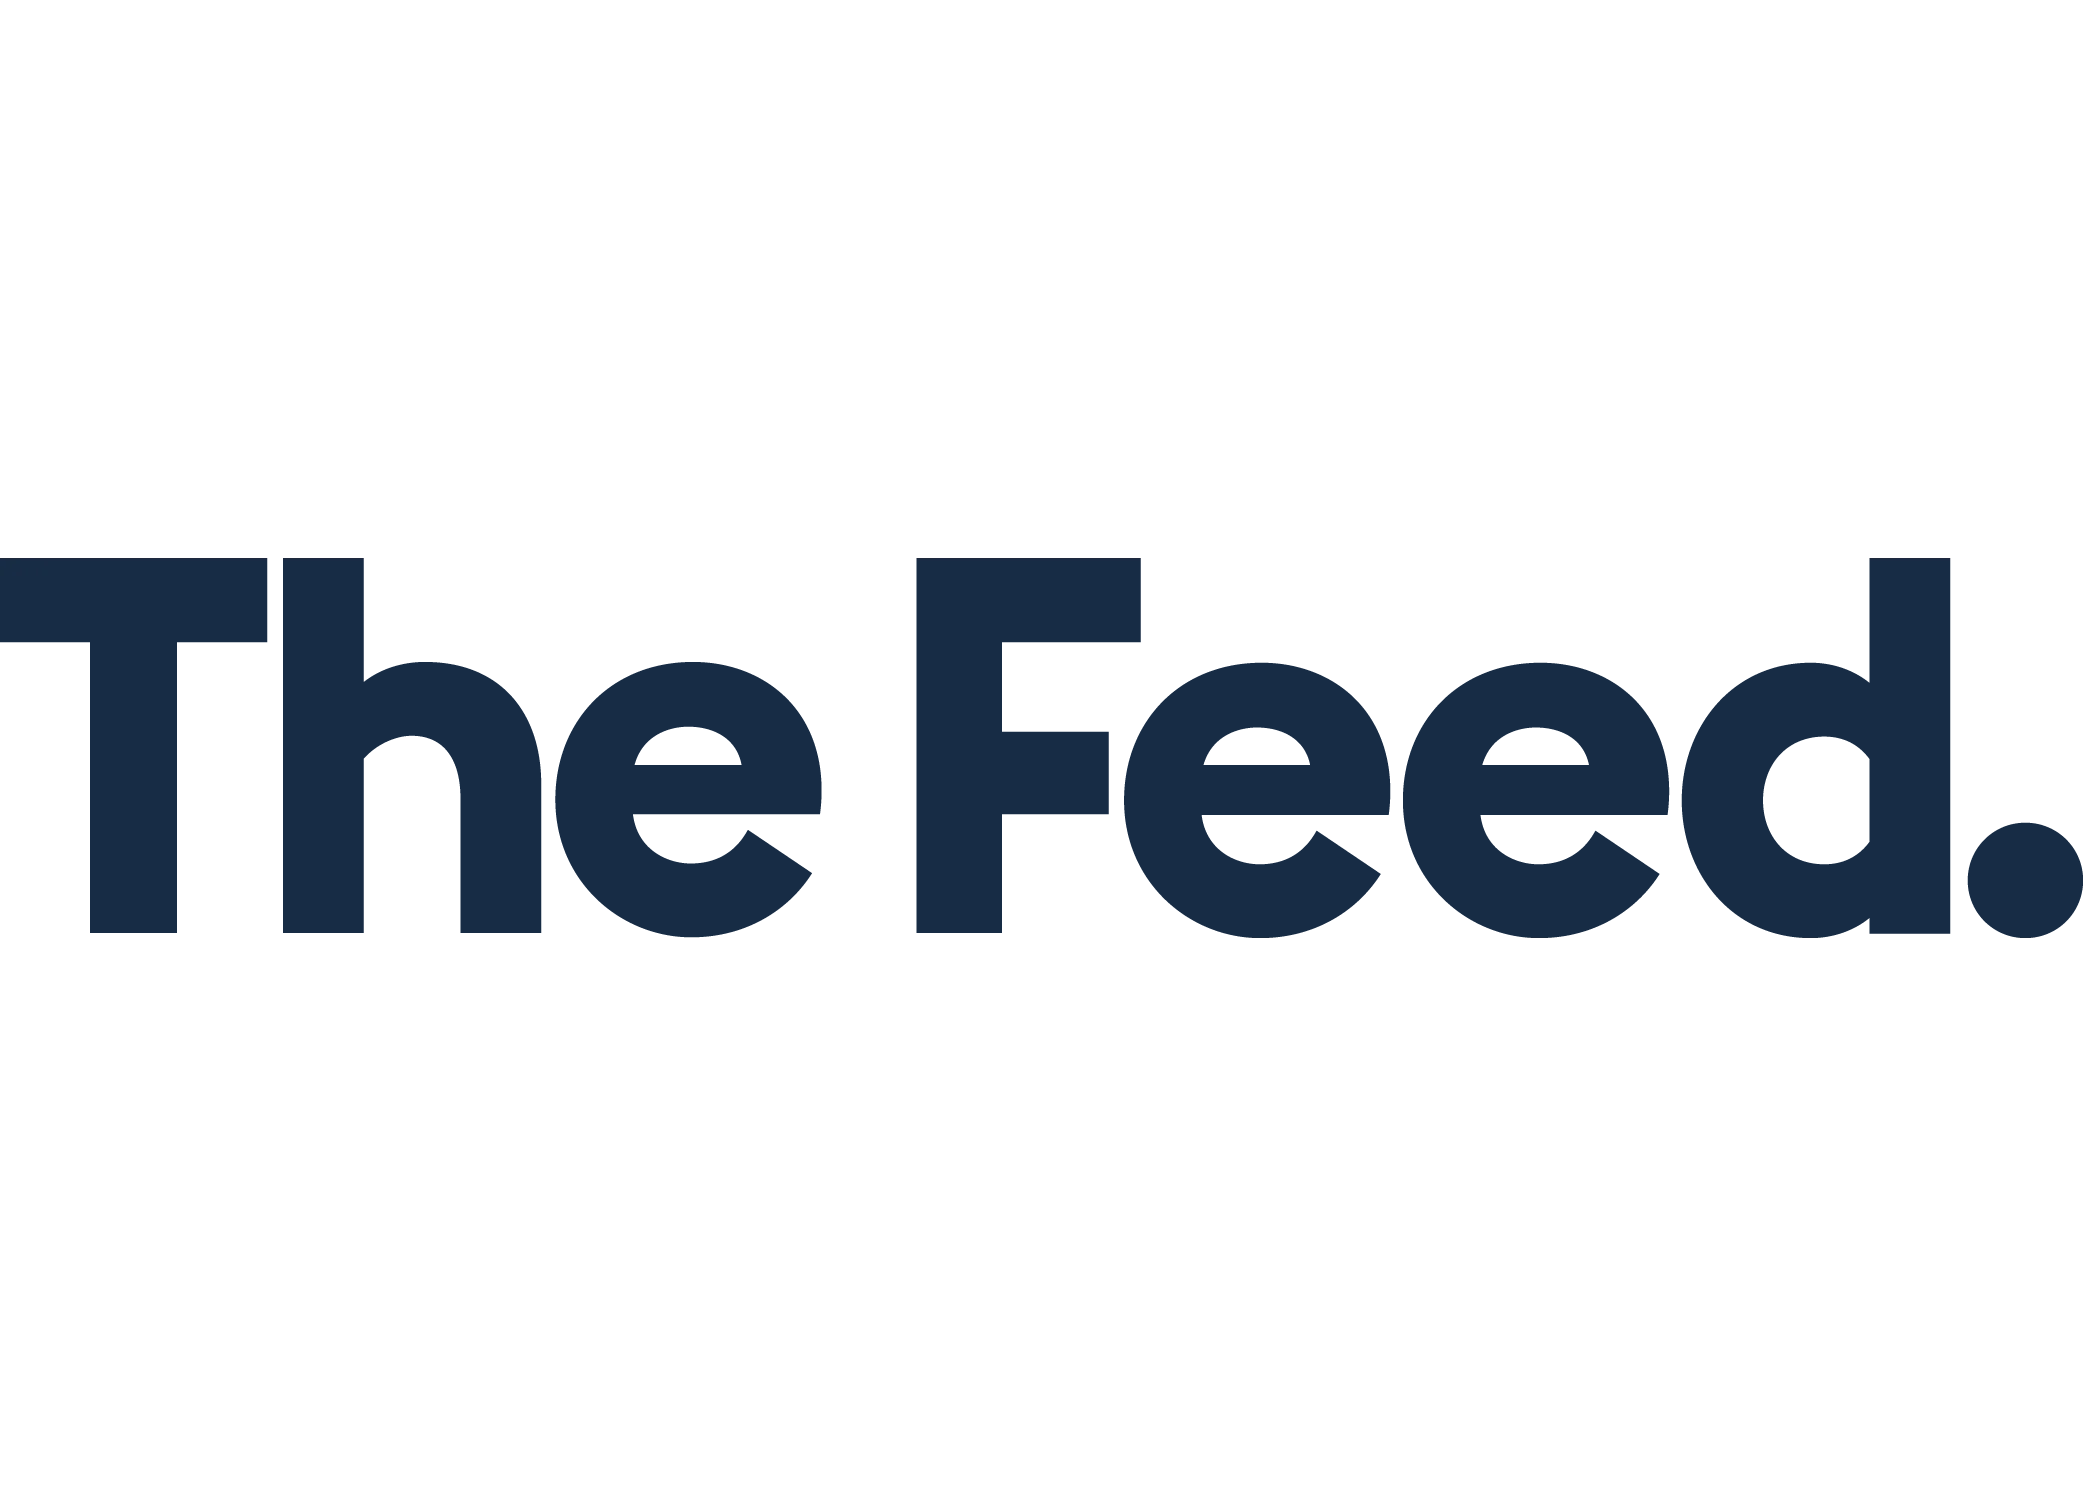 the feedlogo.png